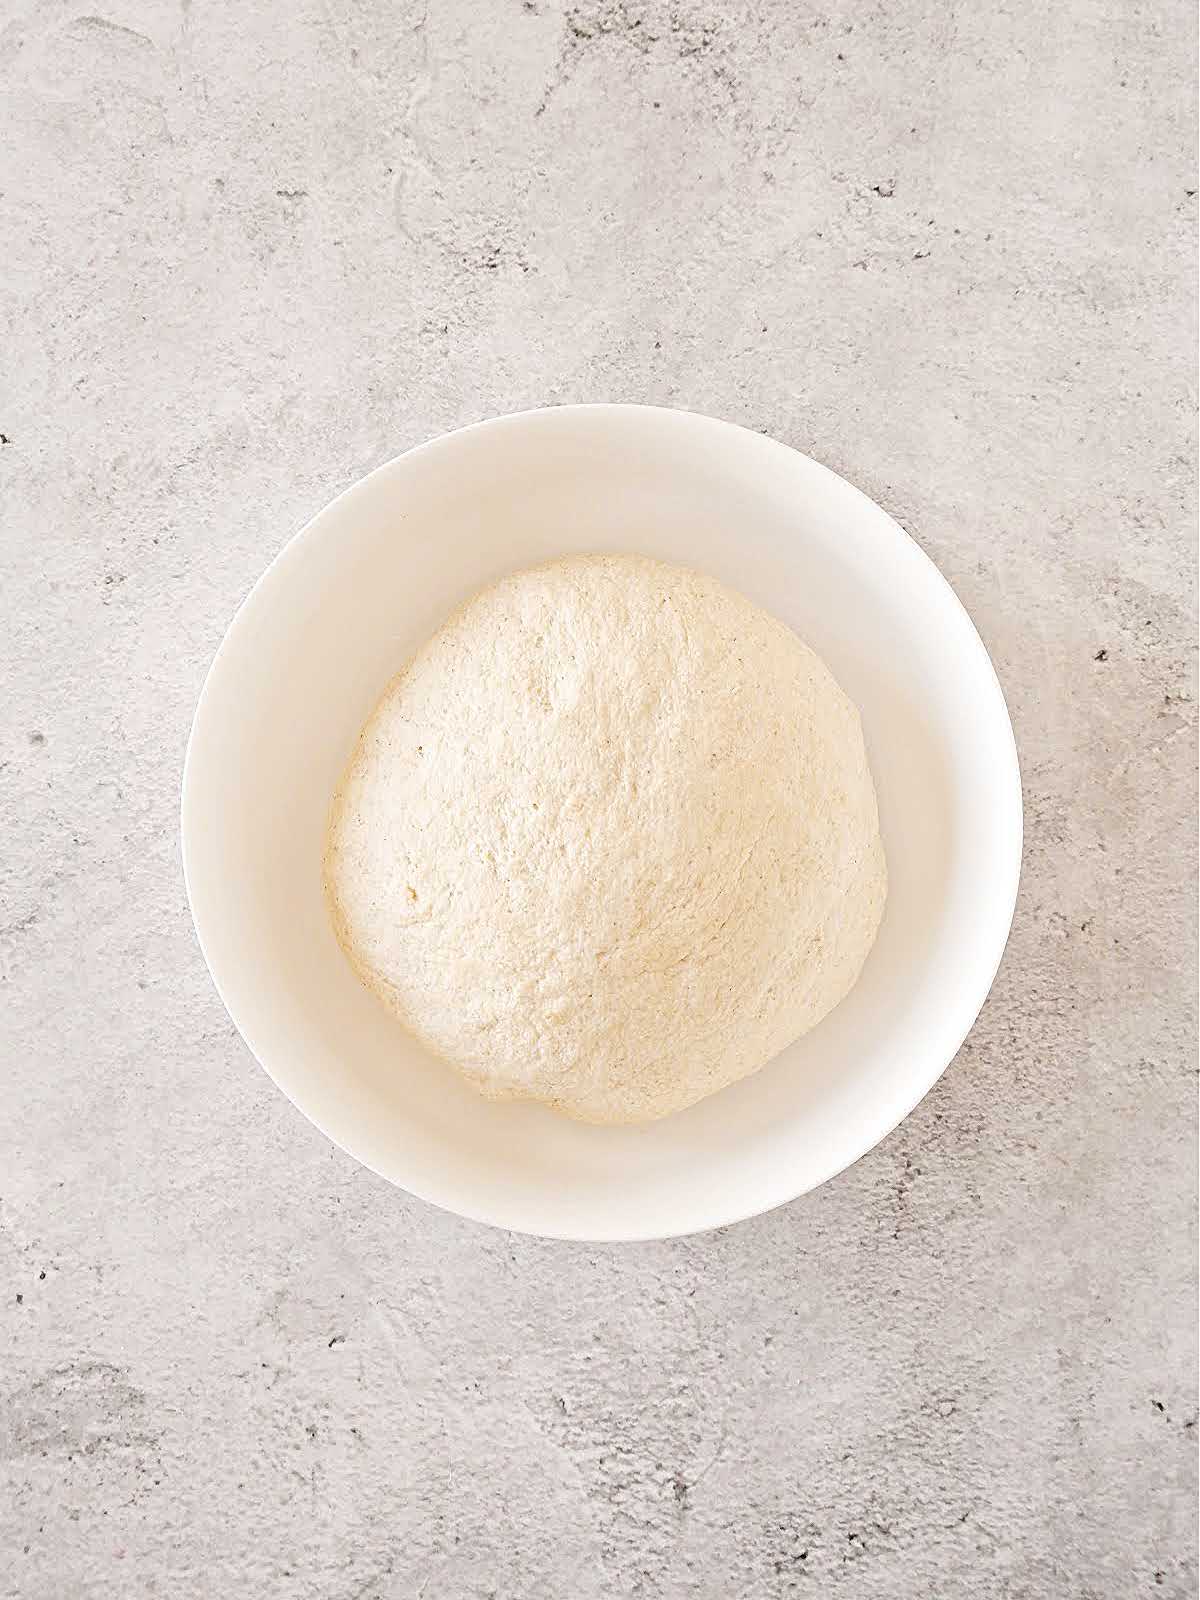 Bread dough ball in a glass bowl on a gray surface.